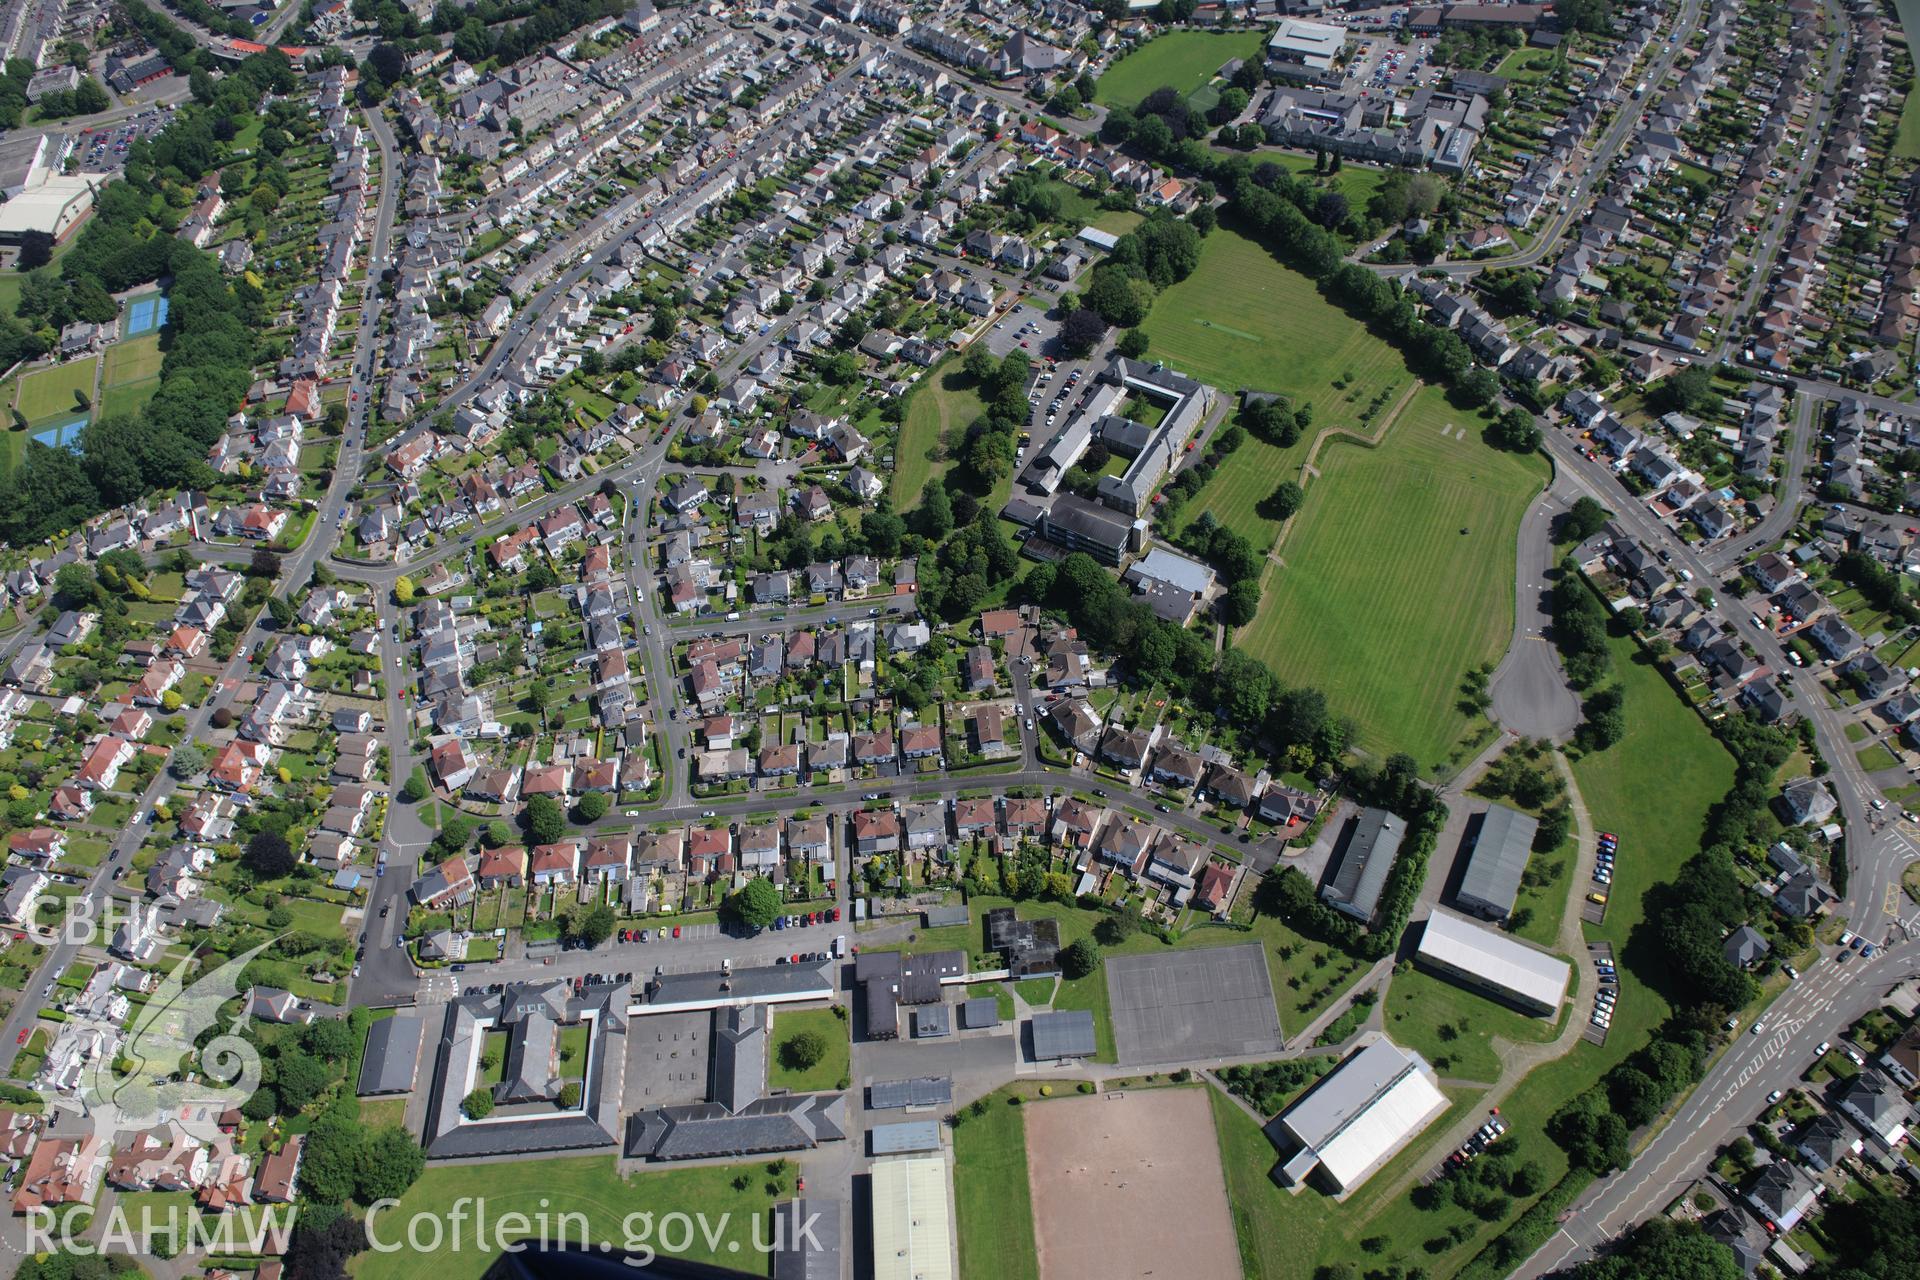 Brynteg Comprehensive school, Bridgend. Oblique aerial photograph taken during the Royal Commission's programme of archaeological aerial reconnaissance by Toby Driver on 19th June 2015.